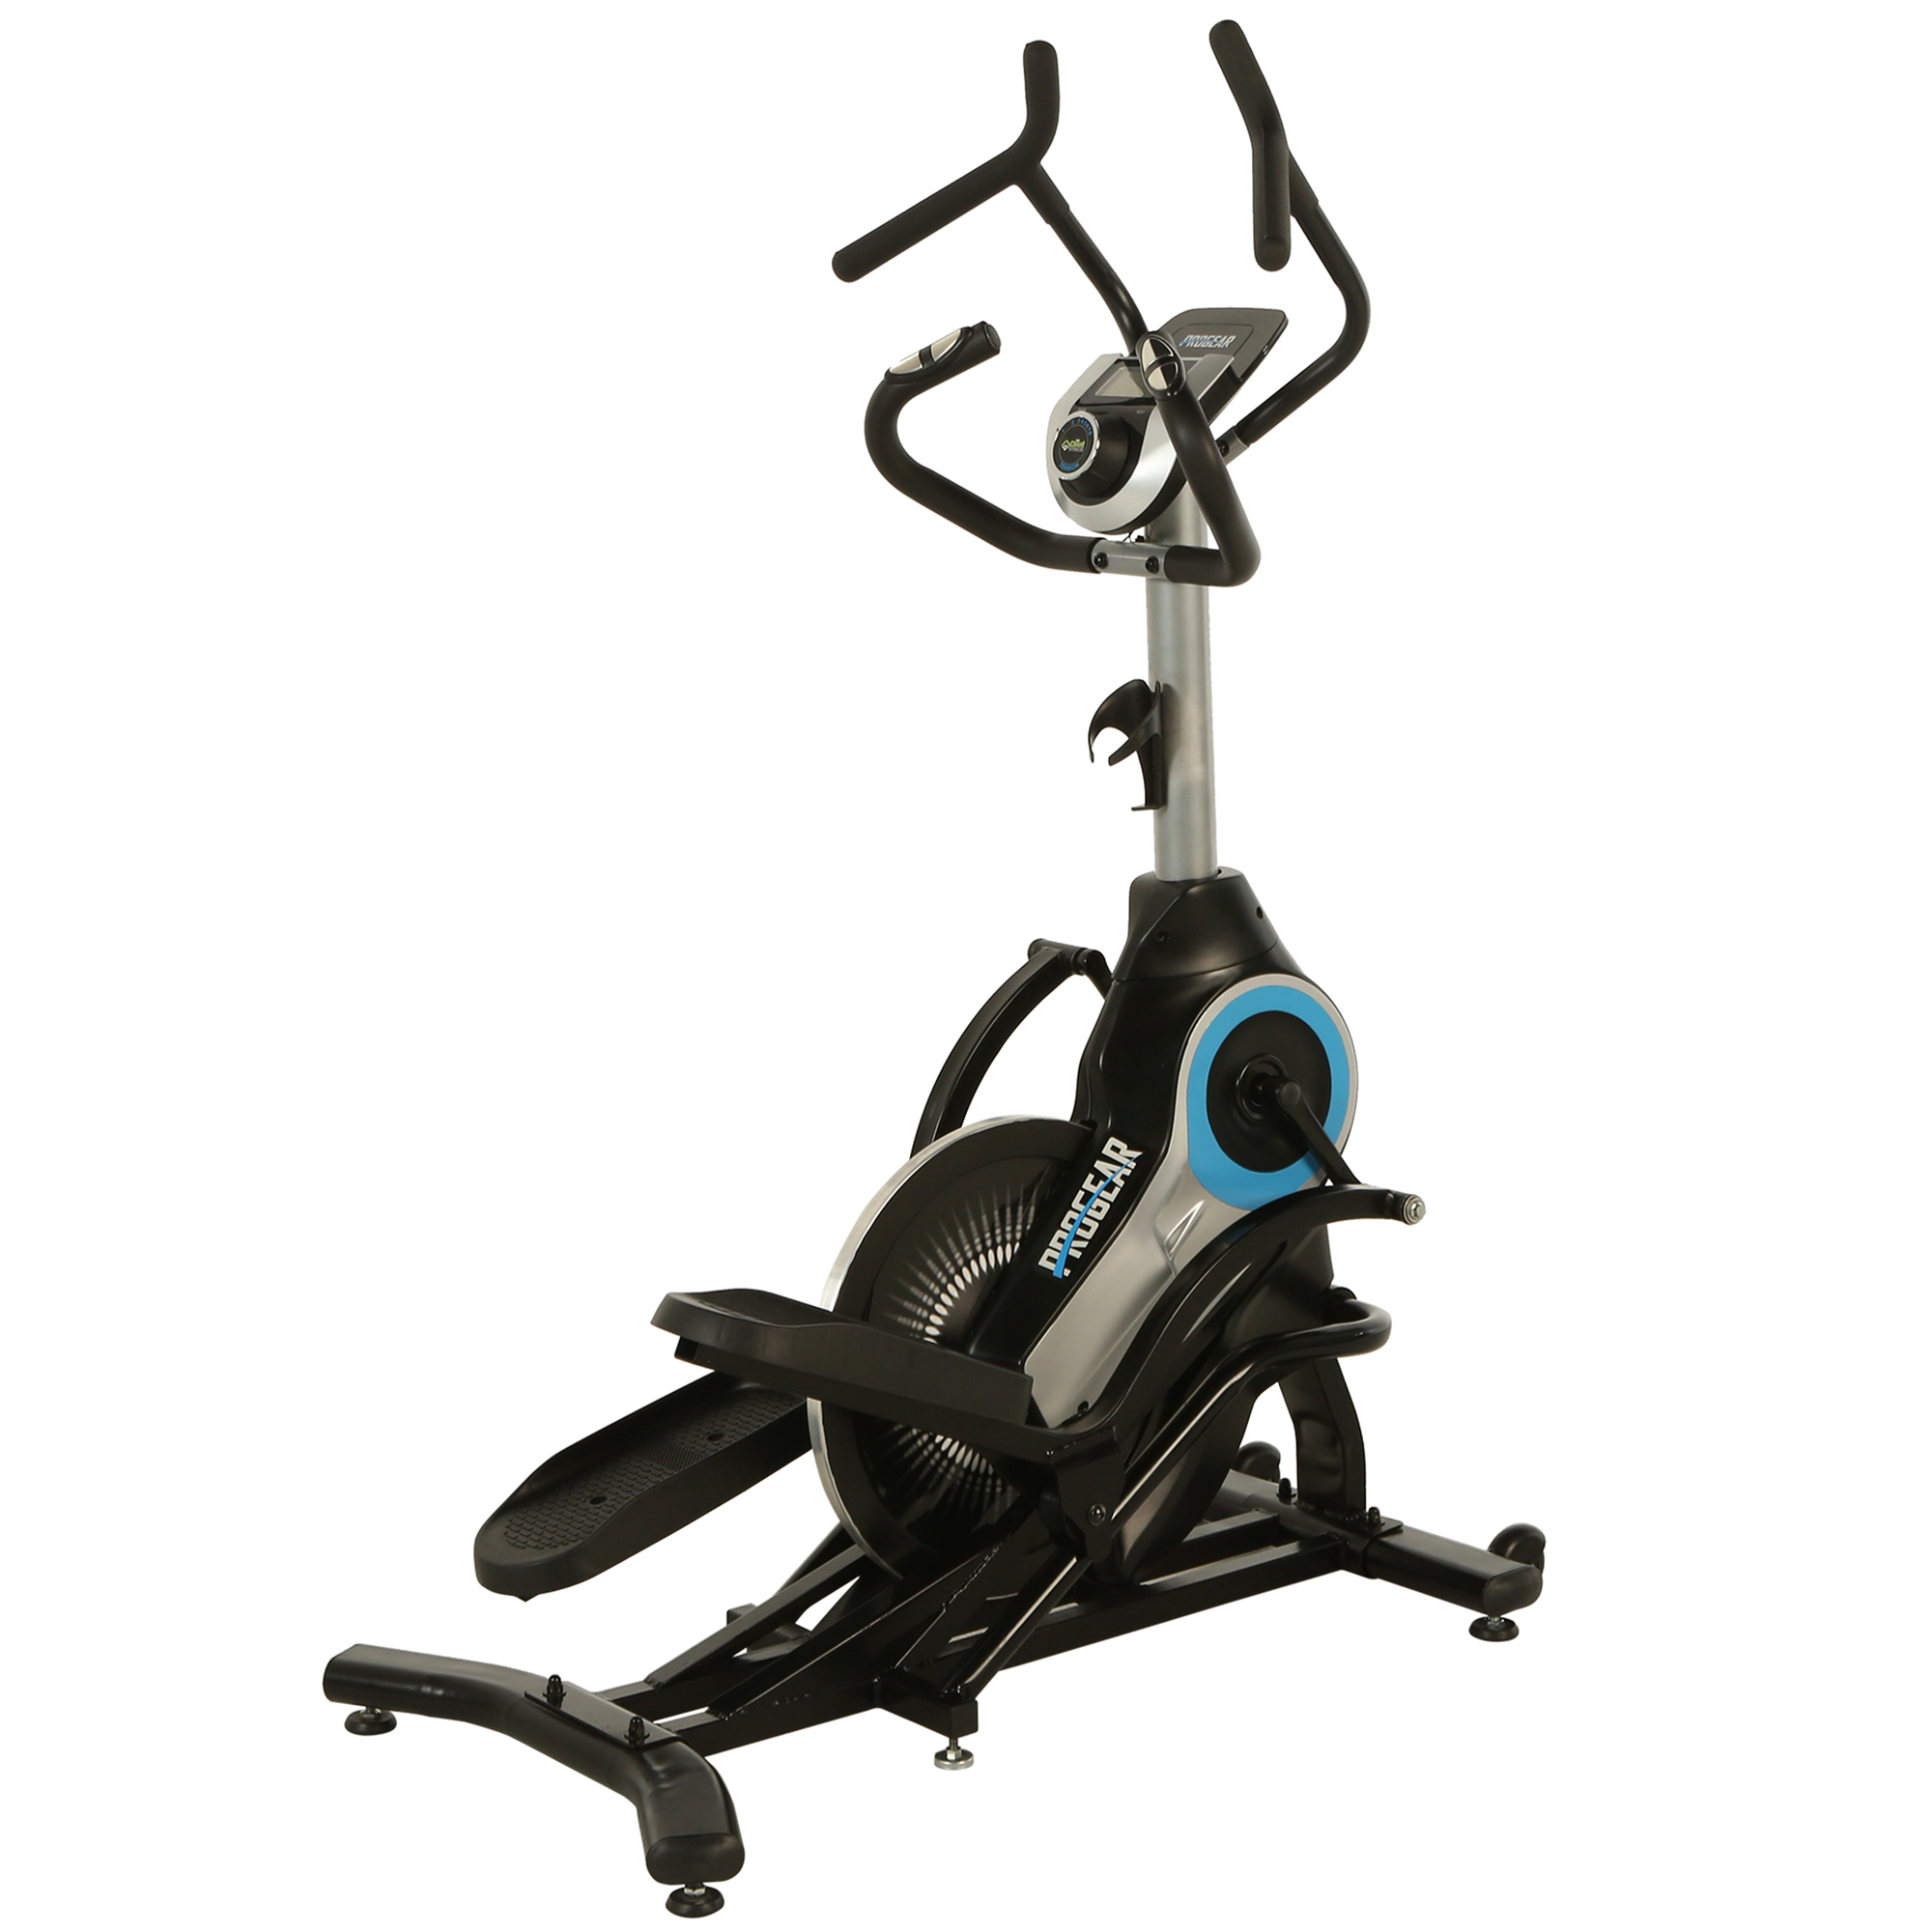 PROGEAR 9900 HIIT Bluetooth Smart Cloud Fitness Crossover Stepper/ Elliptical Trainer with Goal Setting and Free App - image 8 of 19